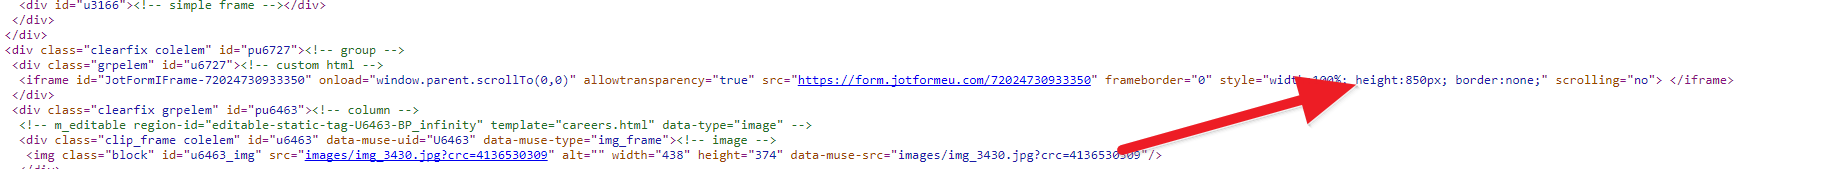 The submit button of the form is missing on my website Image 1 Screenshot 20